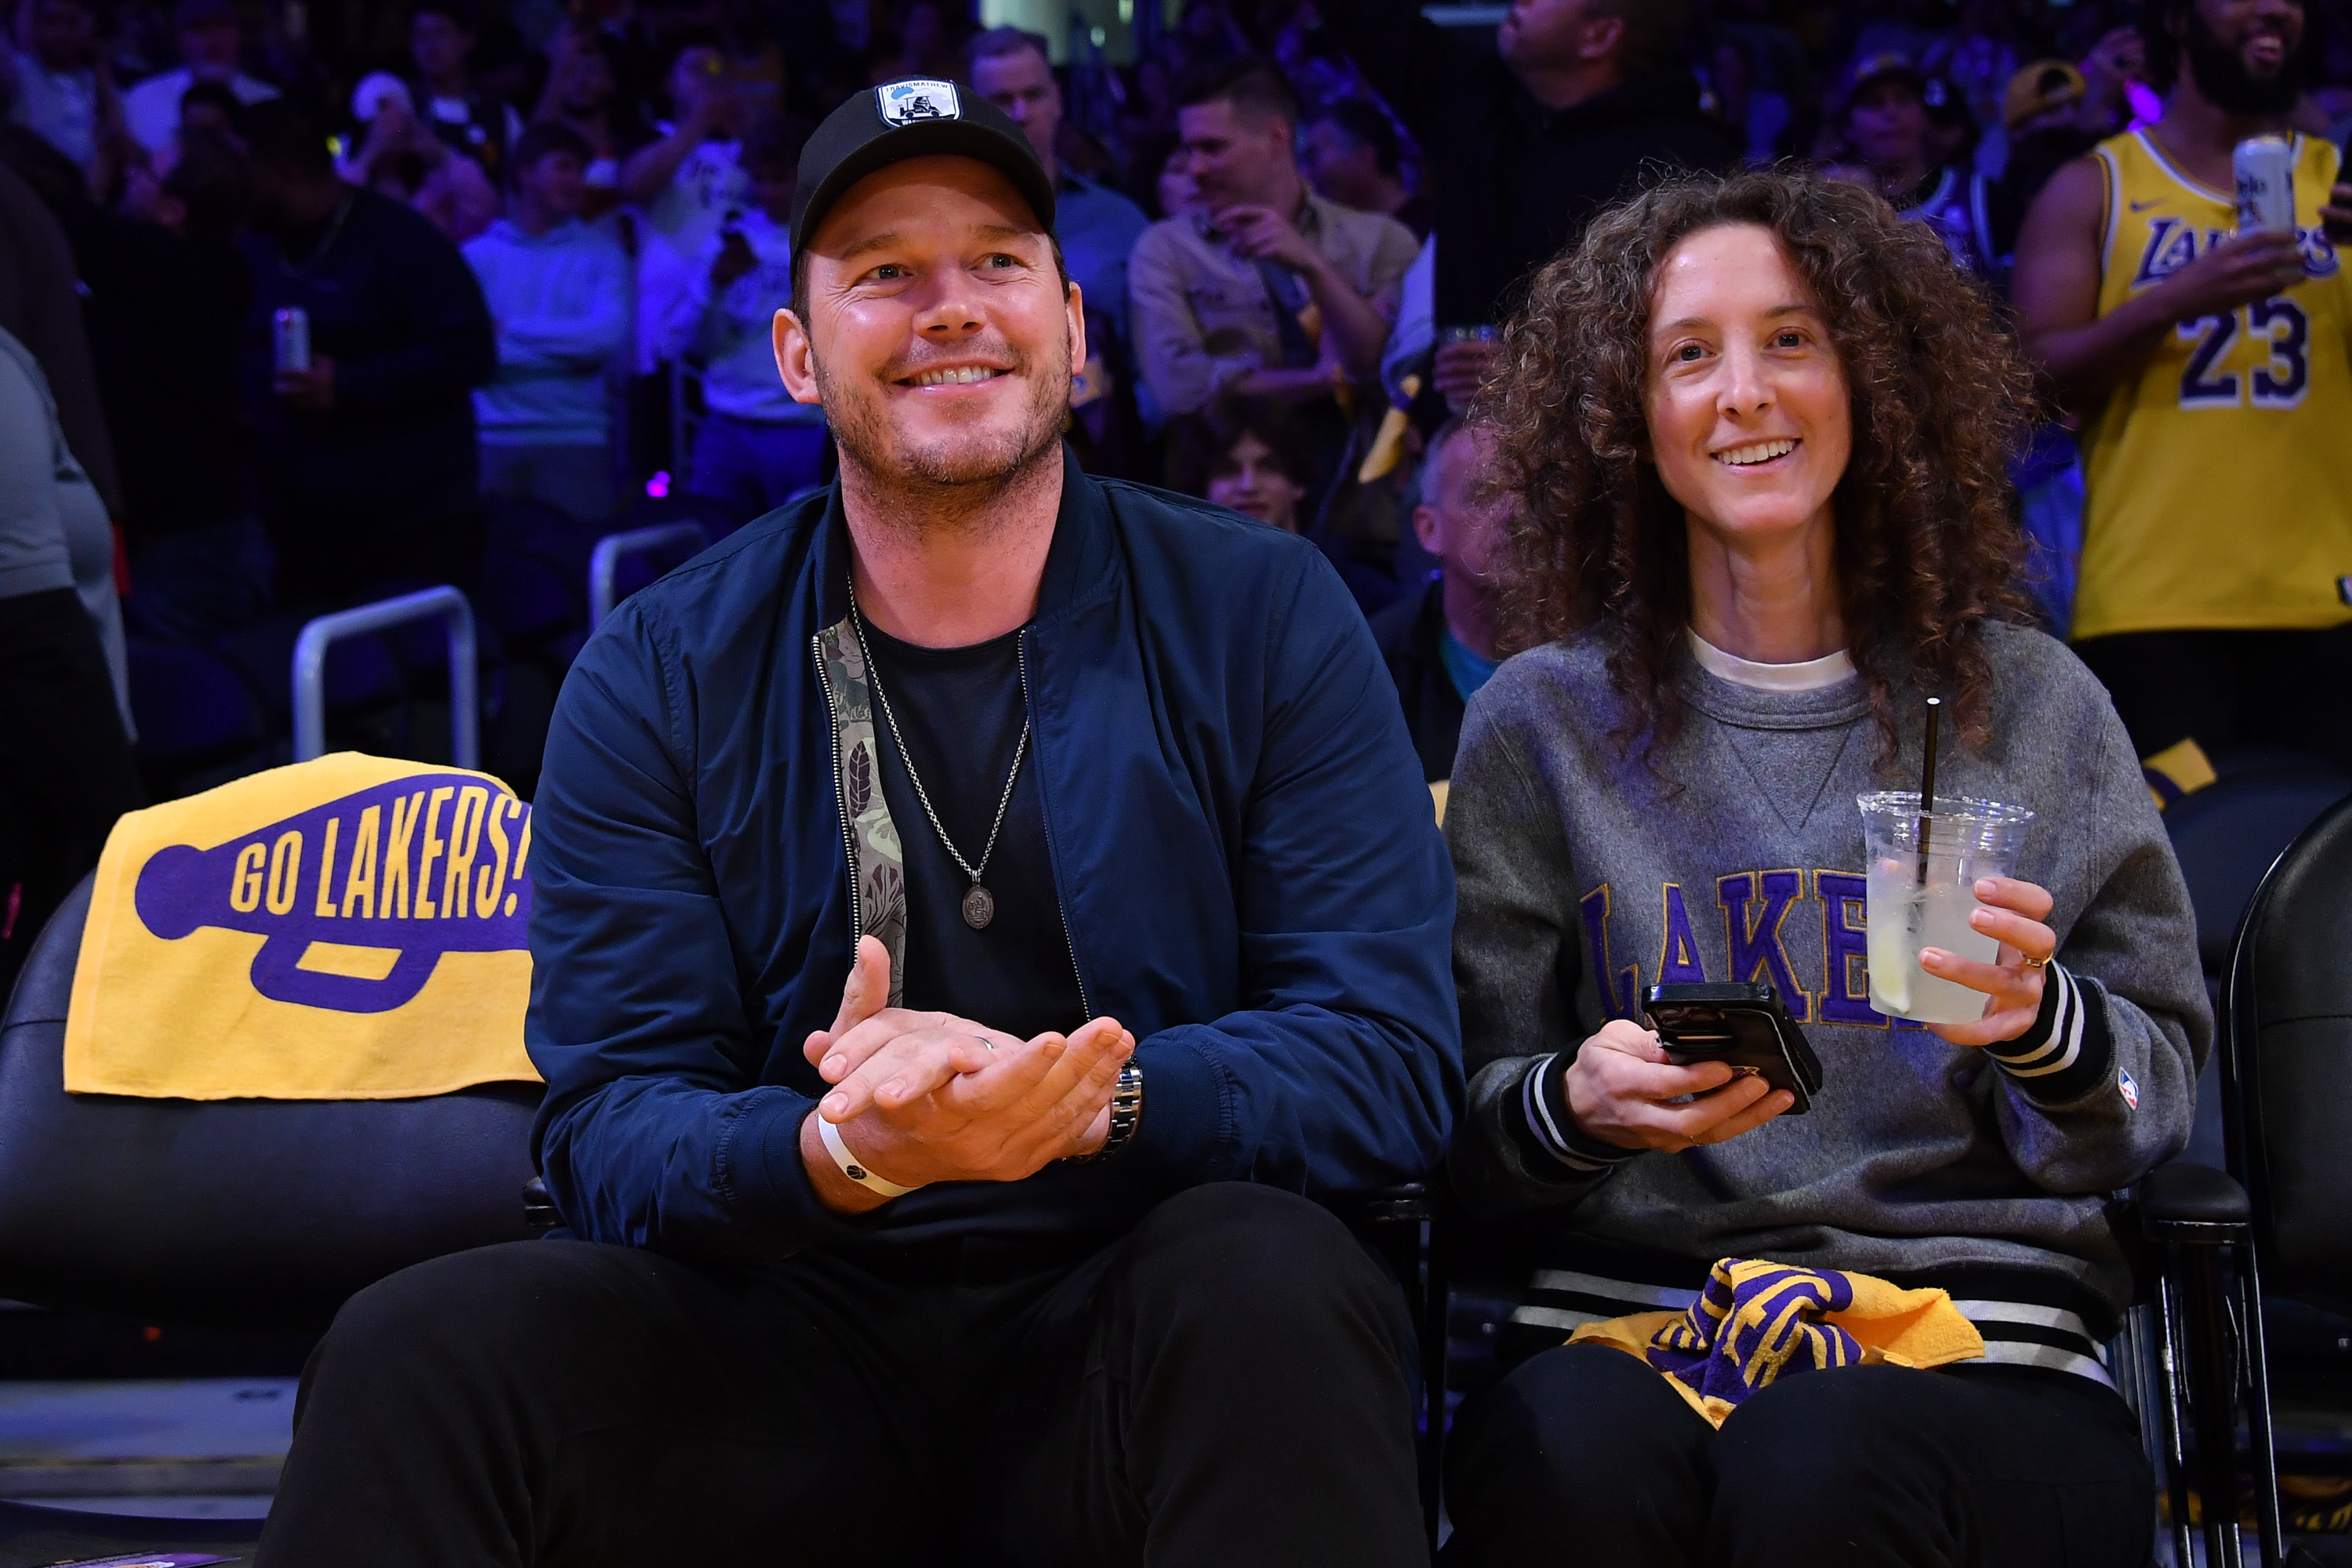 Chris Pratt attends a playoff basketball game between the Los Angeles Lakers and the Golden State Warriors.